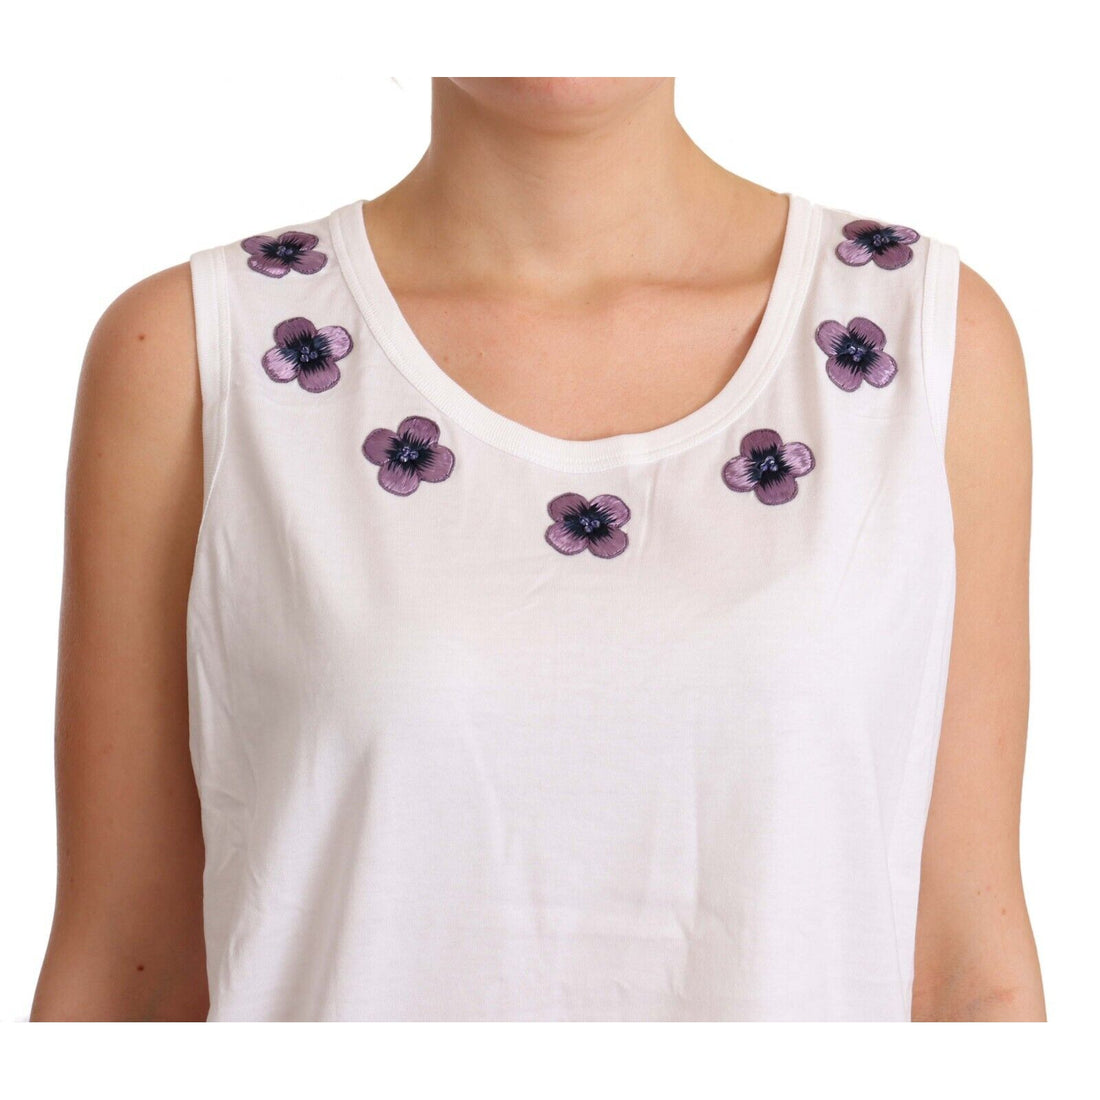 Dolce & Gabbana White Cotton Floral Embroidery Tank T-shirt Top - Paris Deluxe